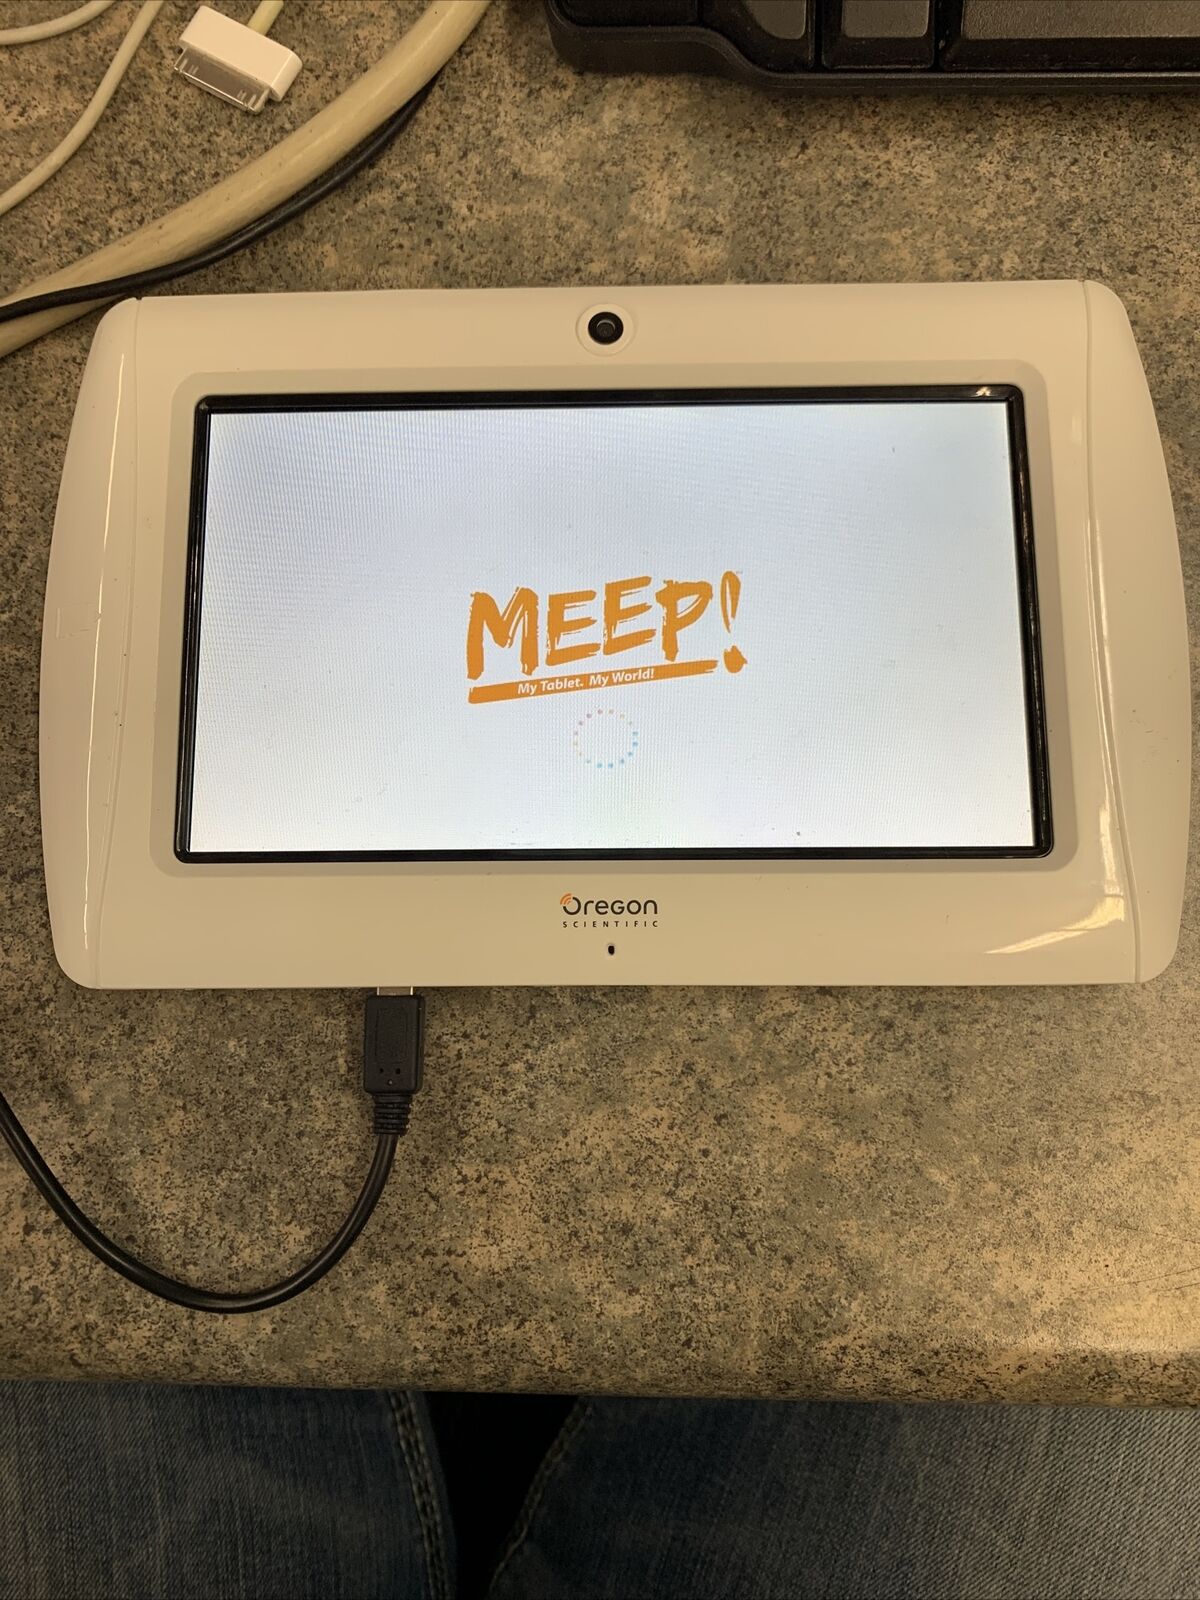 Oregon Scientific Meep Children's Tablet Computer - Tested And Working